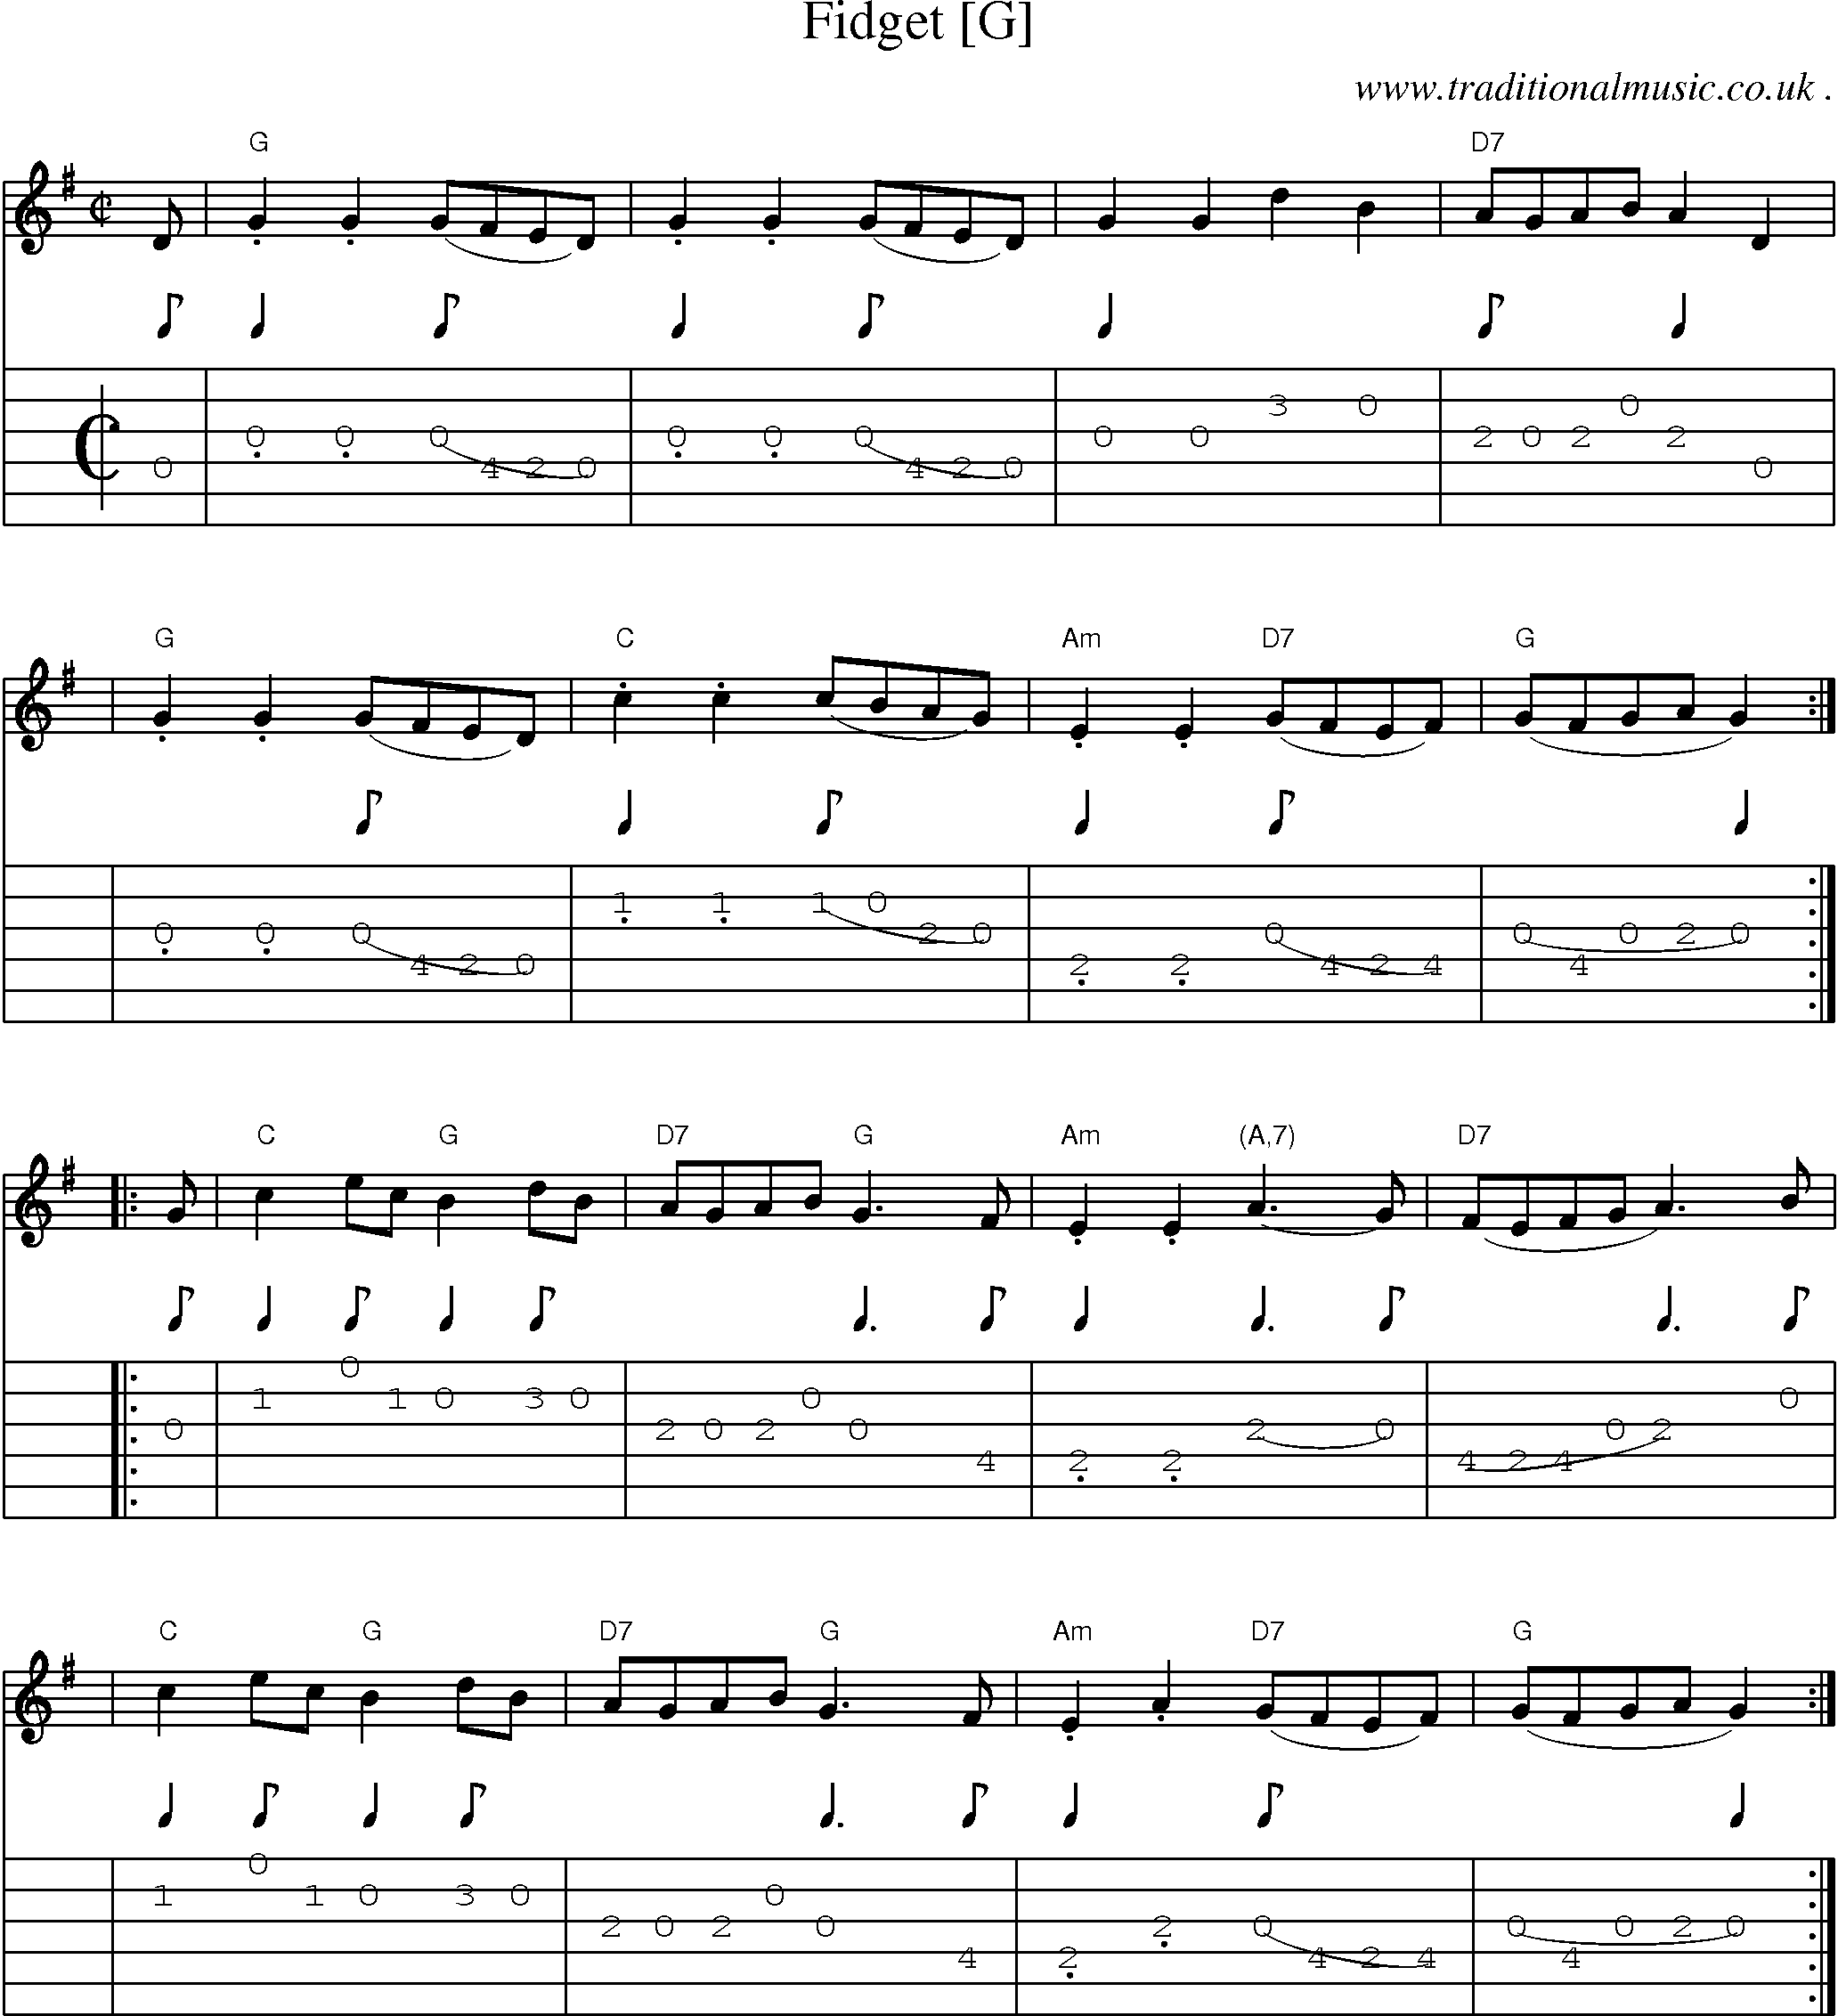 Sheet-music  score, Chords and Guitar Tabs for Fidget [g]